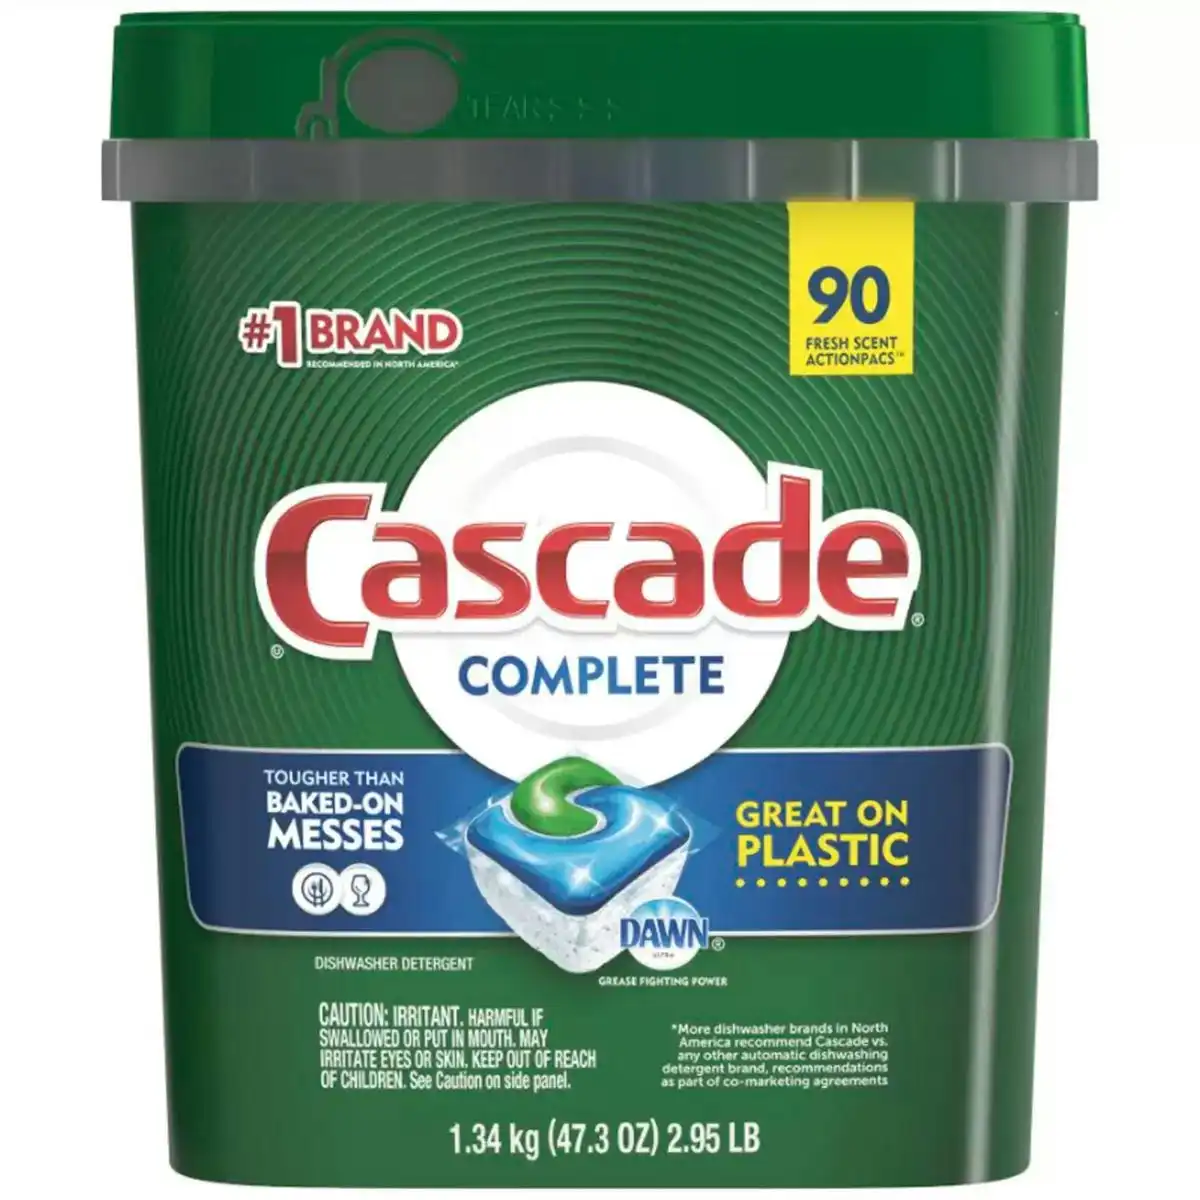 Cascade Advanced Action Packs with Dawn Dishwashing Tablets 90 Count